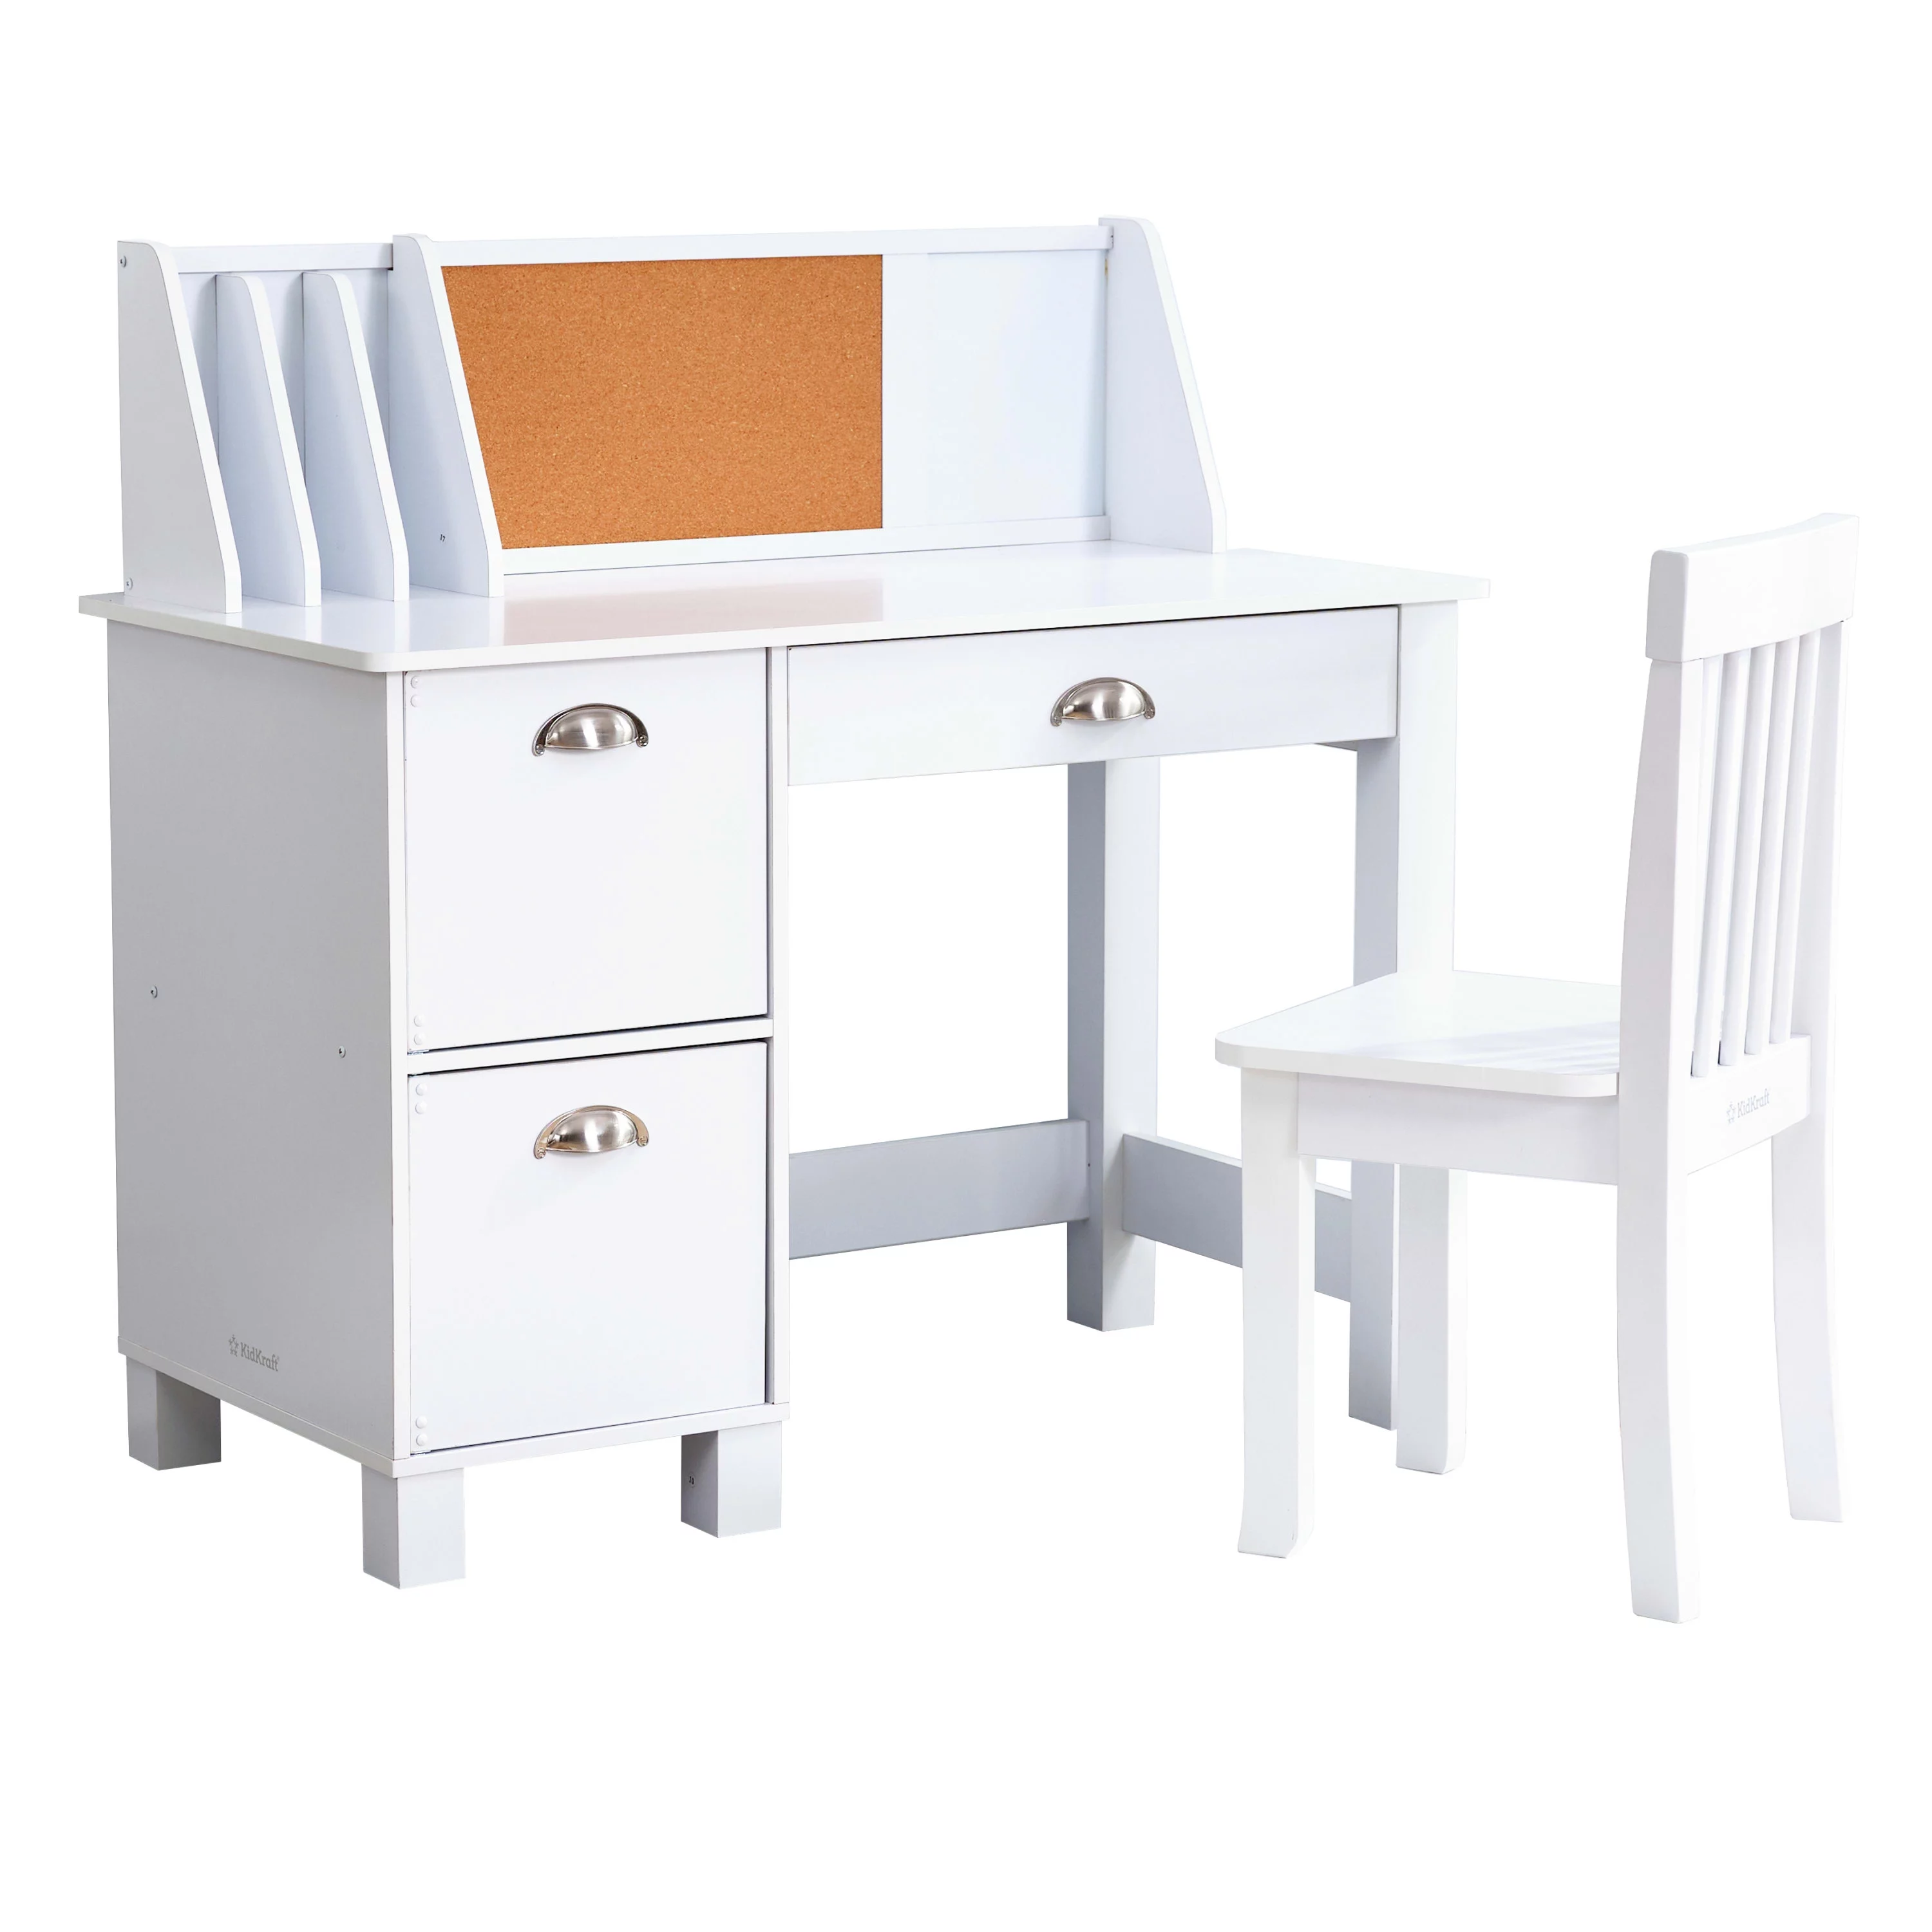 KidKraft Children's Wooden Study Desk with Chair, White, for Ages 5+